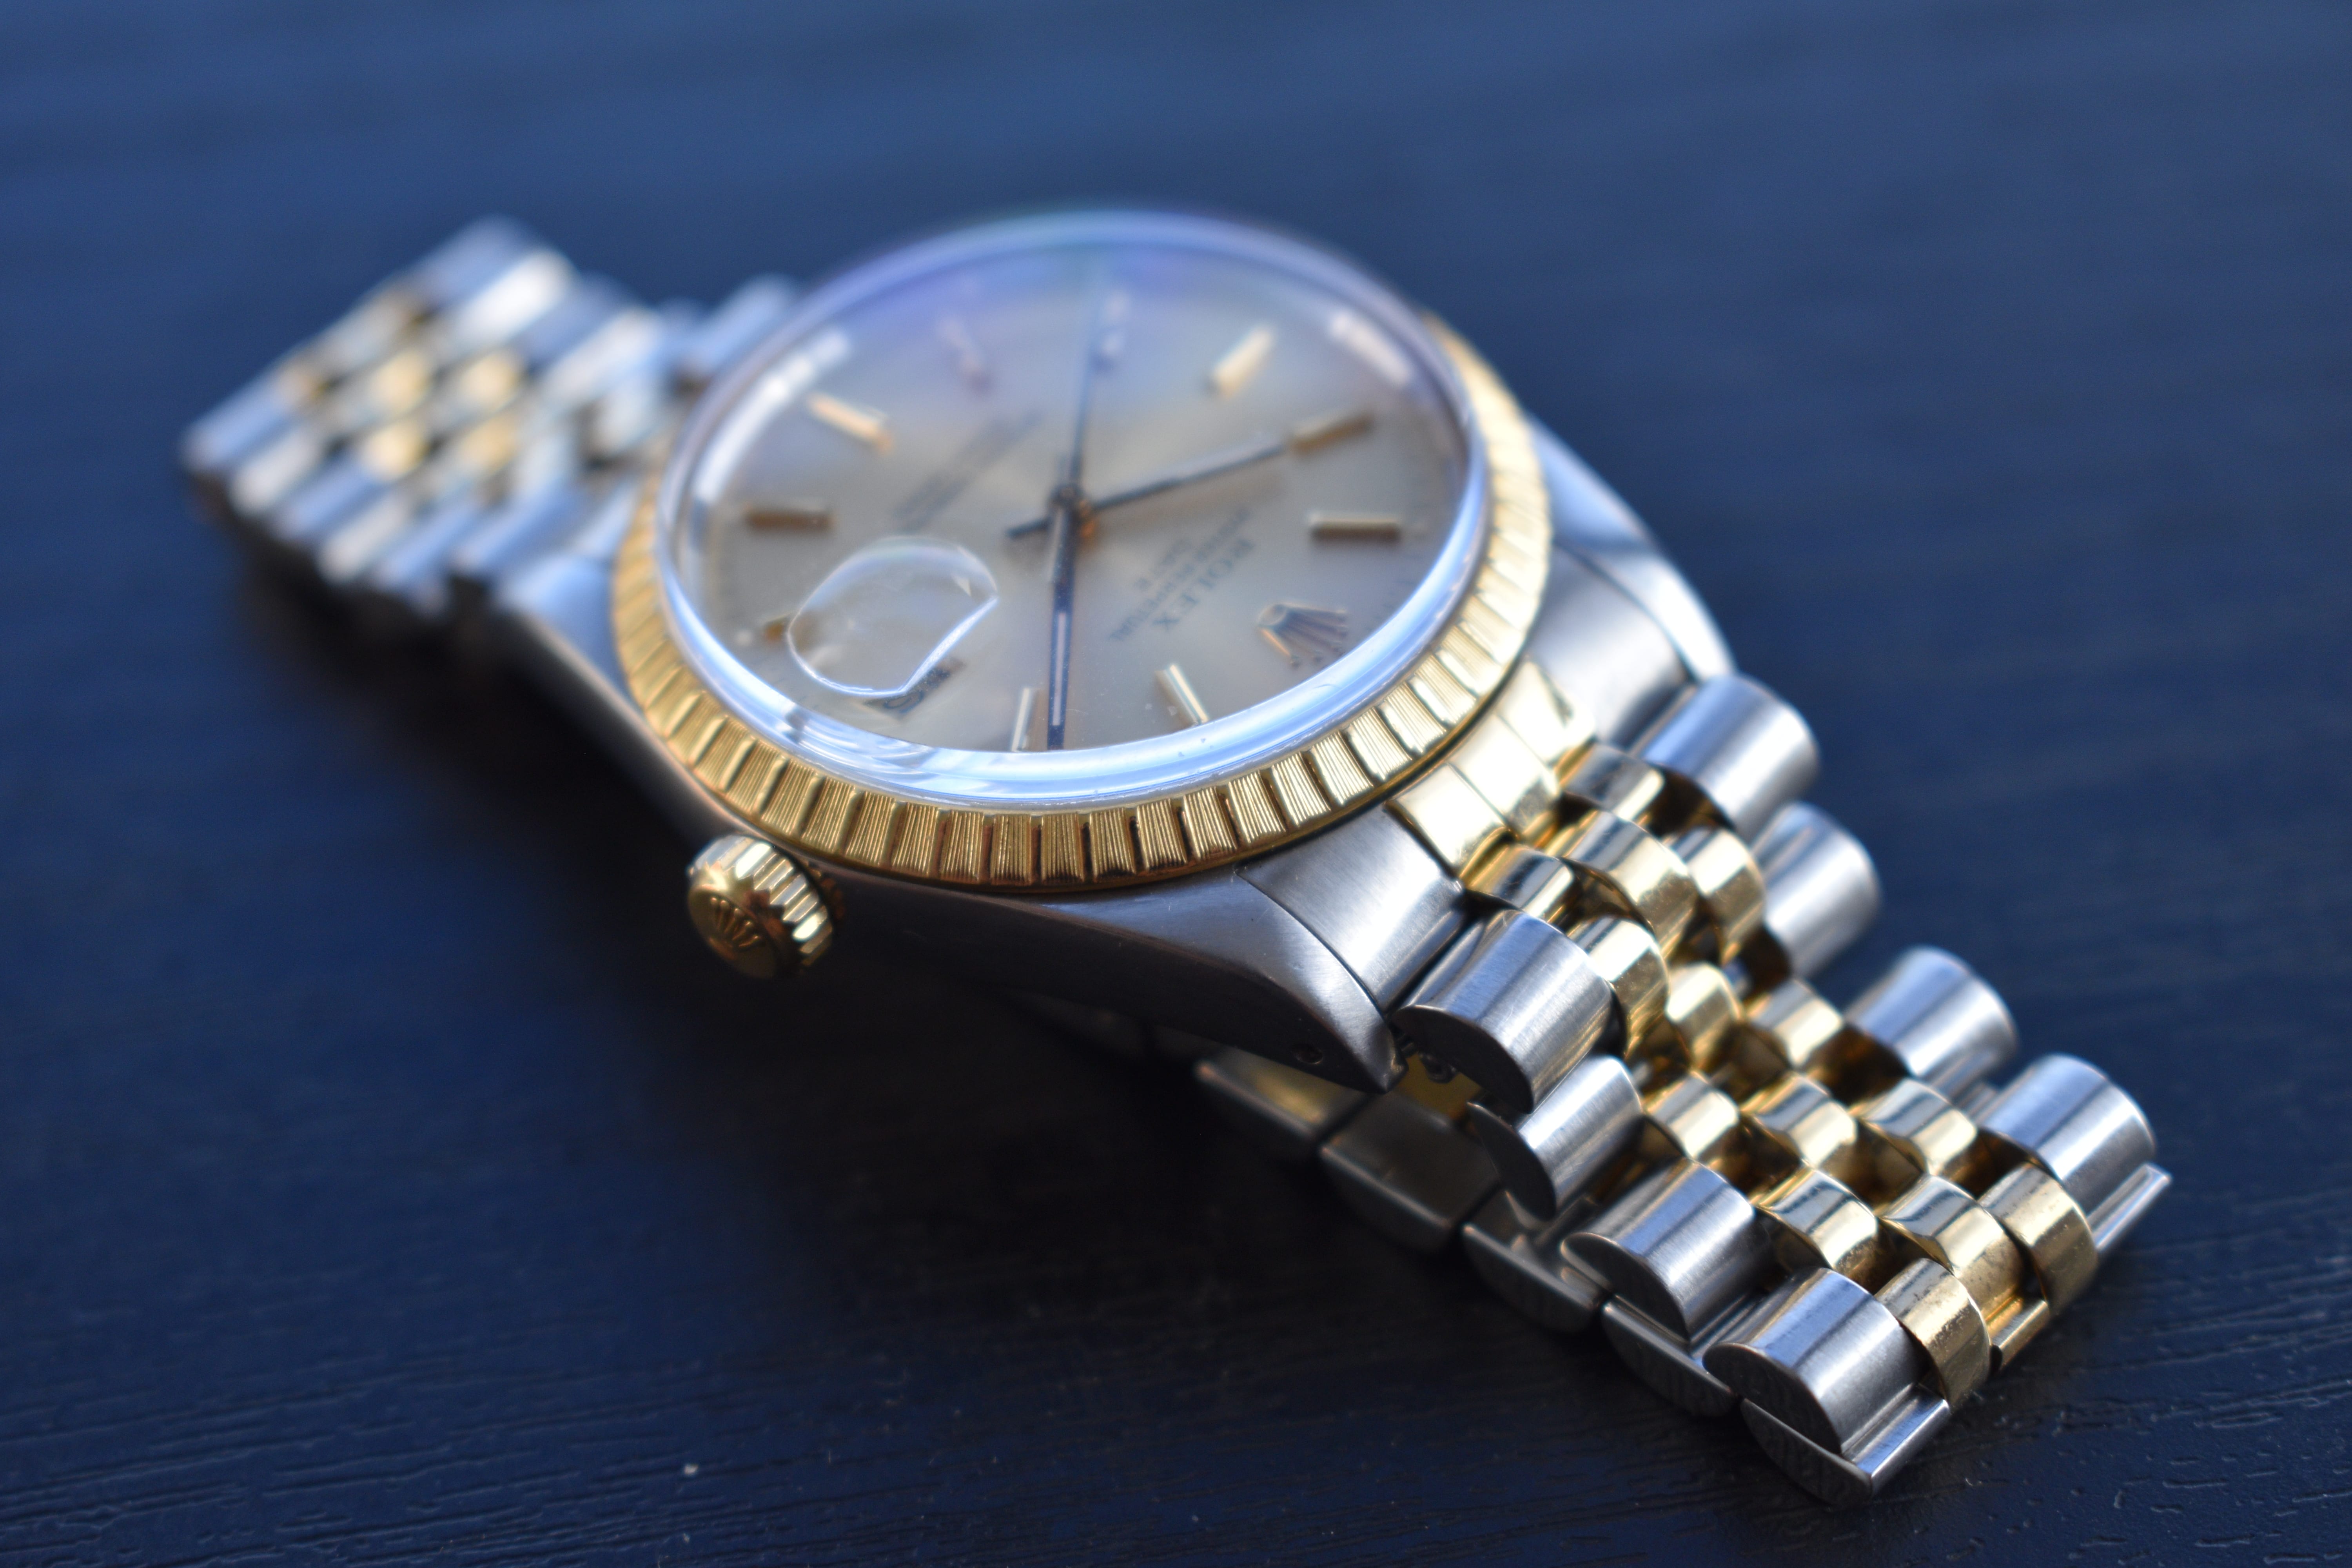 Rolex Oyster Perpetual Date 15053 | Value Your Watch